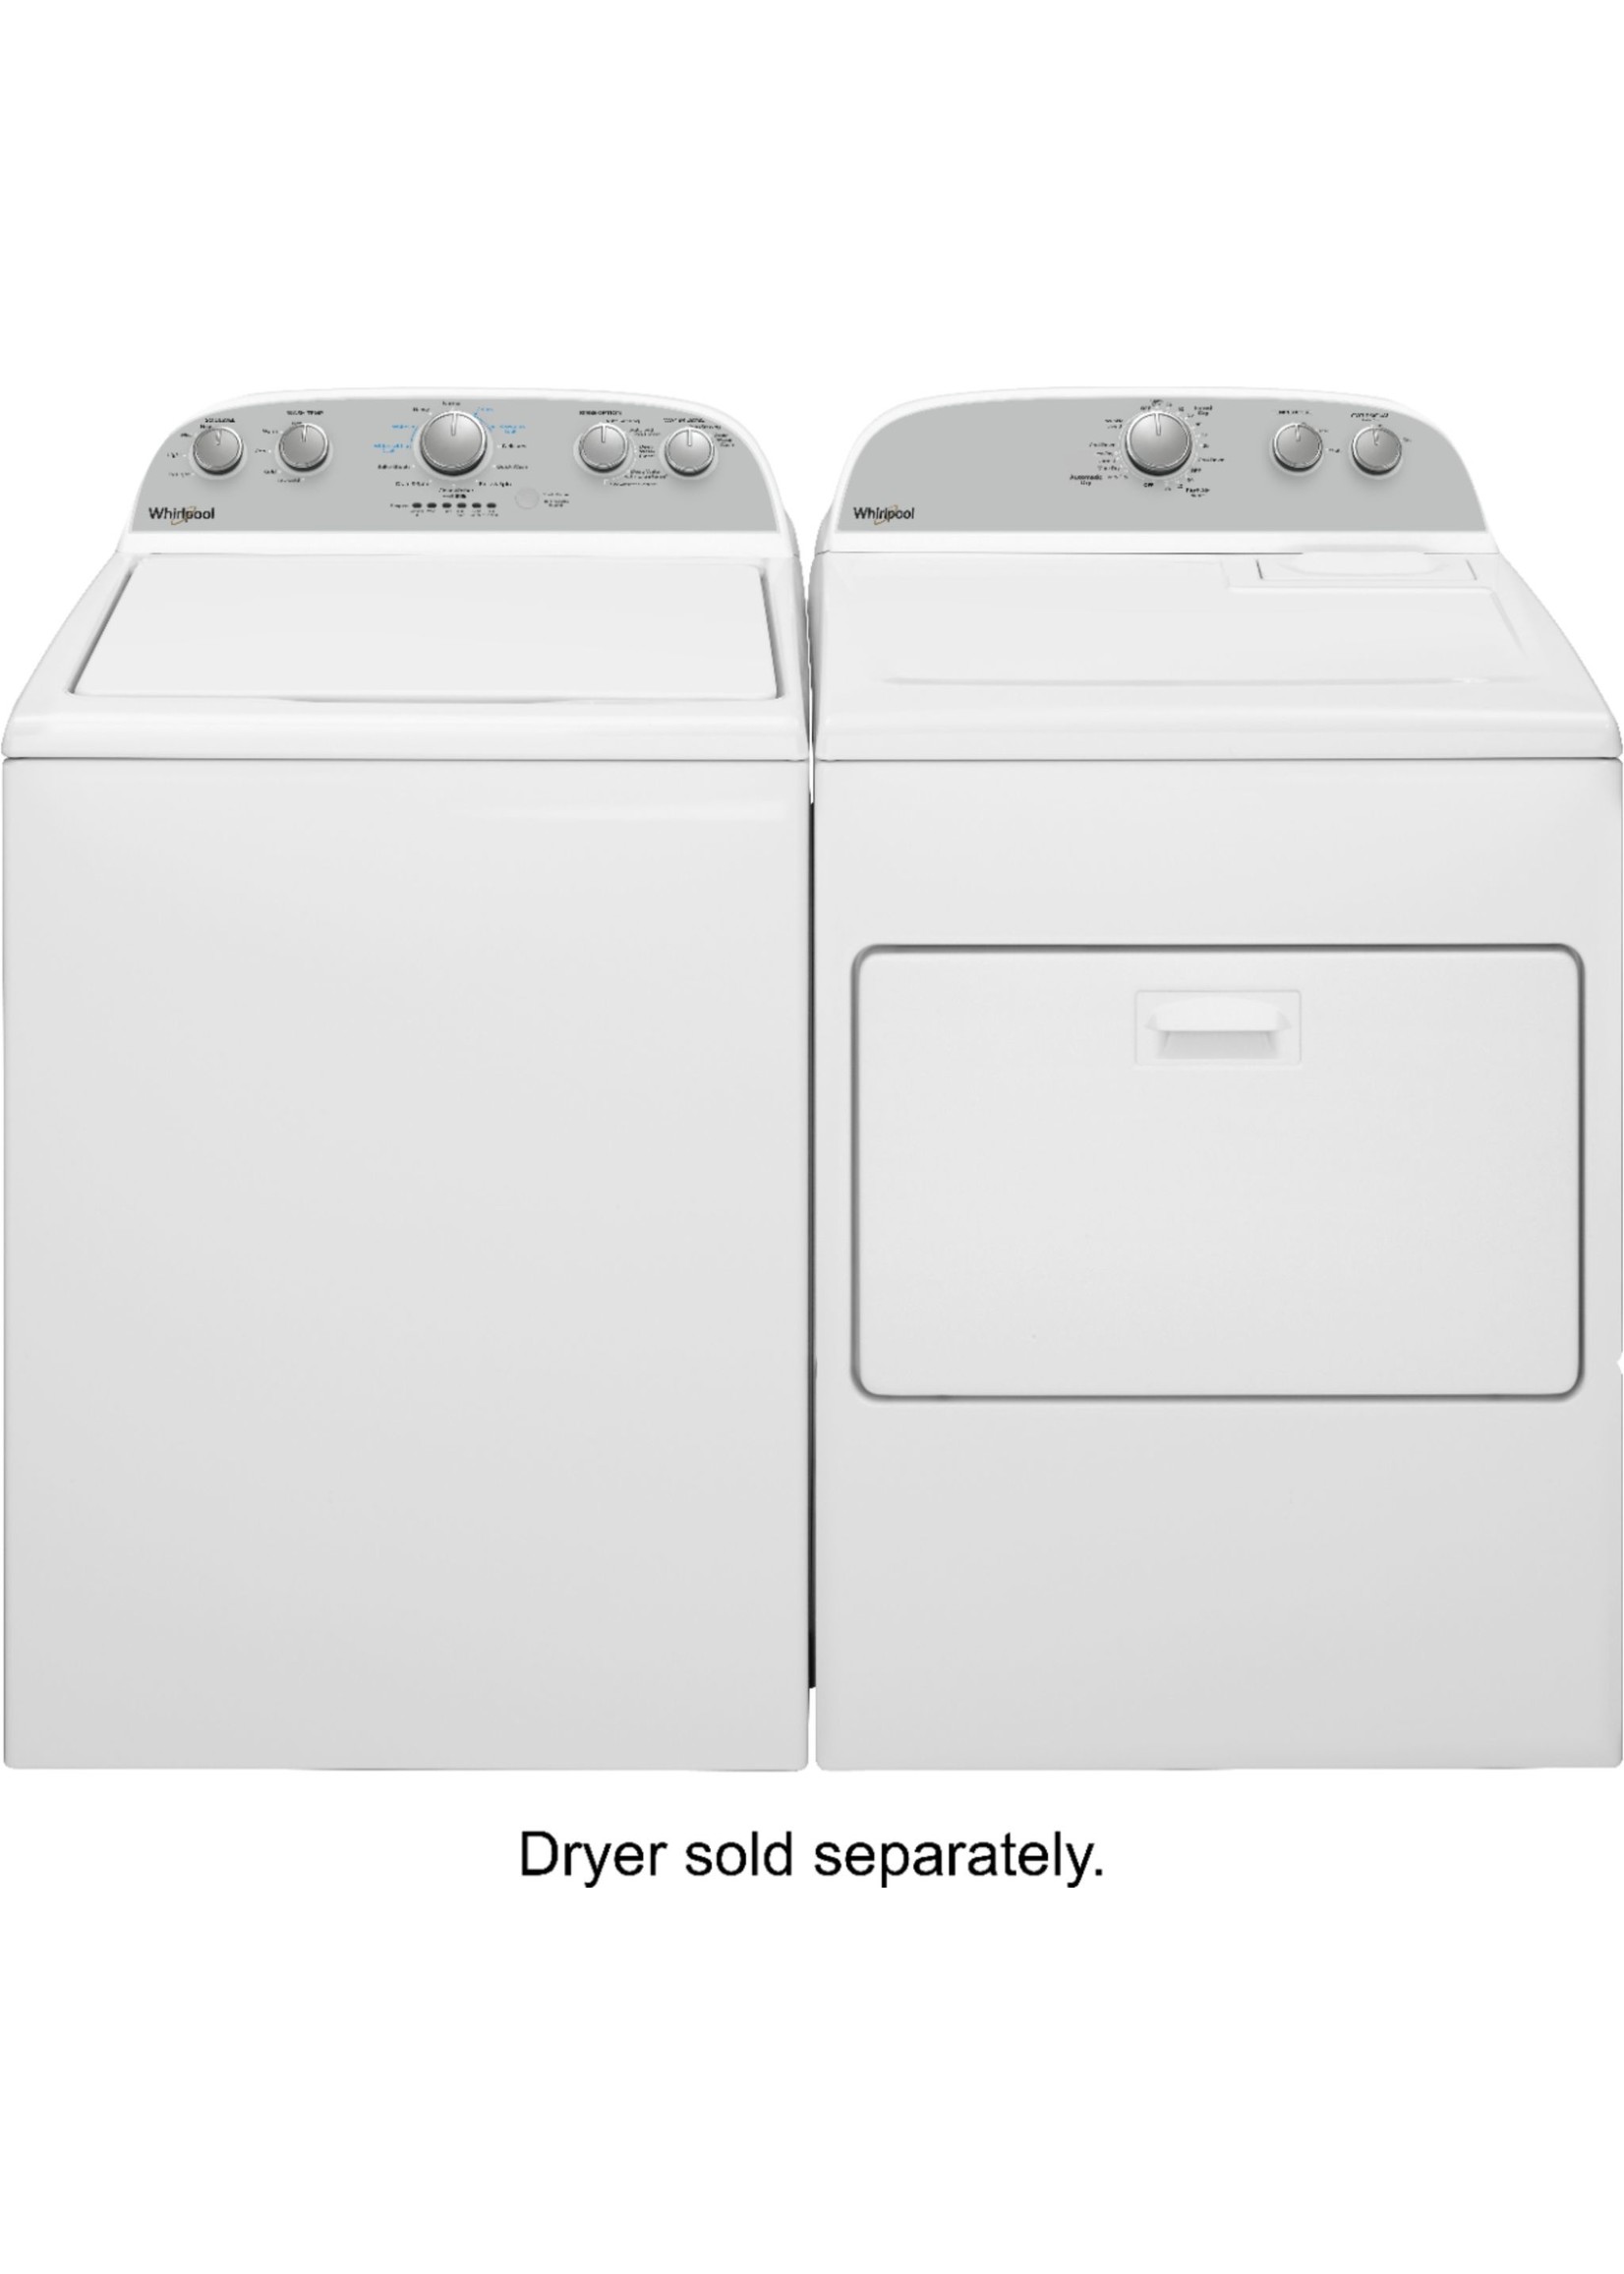 Whirlpool Package - Whirlpool - 3.8 Cu. Ft. High Efficiency Top Load Washer with 360 Wash Agitator and 7 Cu. Ft. Gas Dryer with AutoDry Drying System - White